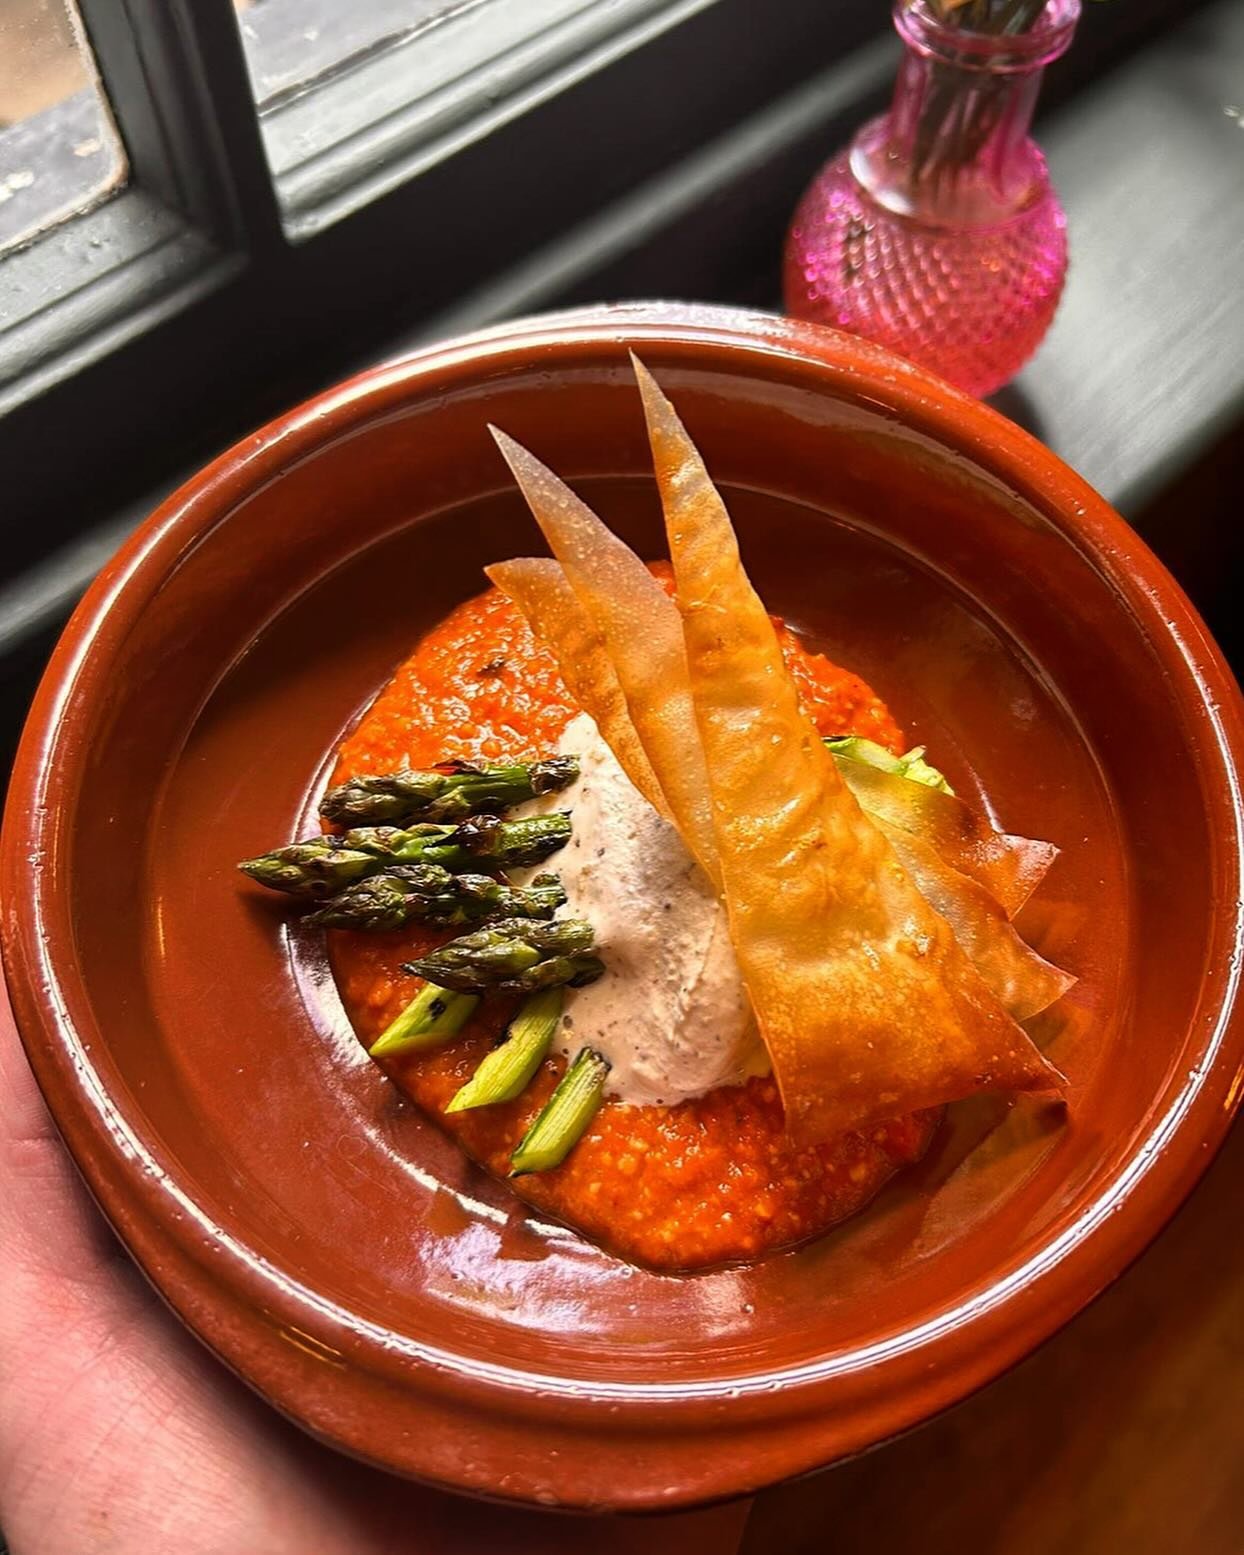 -𝙎𝙋𝙍𝙄𝙉𝙂 𝘿𝙀𝙇𝙄𝙂𝙃𝙏-

Spring has finally arrived, and we&rsquo;re thrilled to introduce our latest culinary creation: 
Chargrilled Asparagus with Romesco, Almond Cream, Filo Pastry Crisp, and Balsamic Reduction.

Hurry in, as the season for 